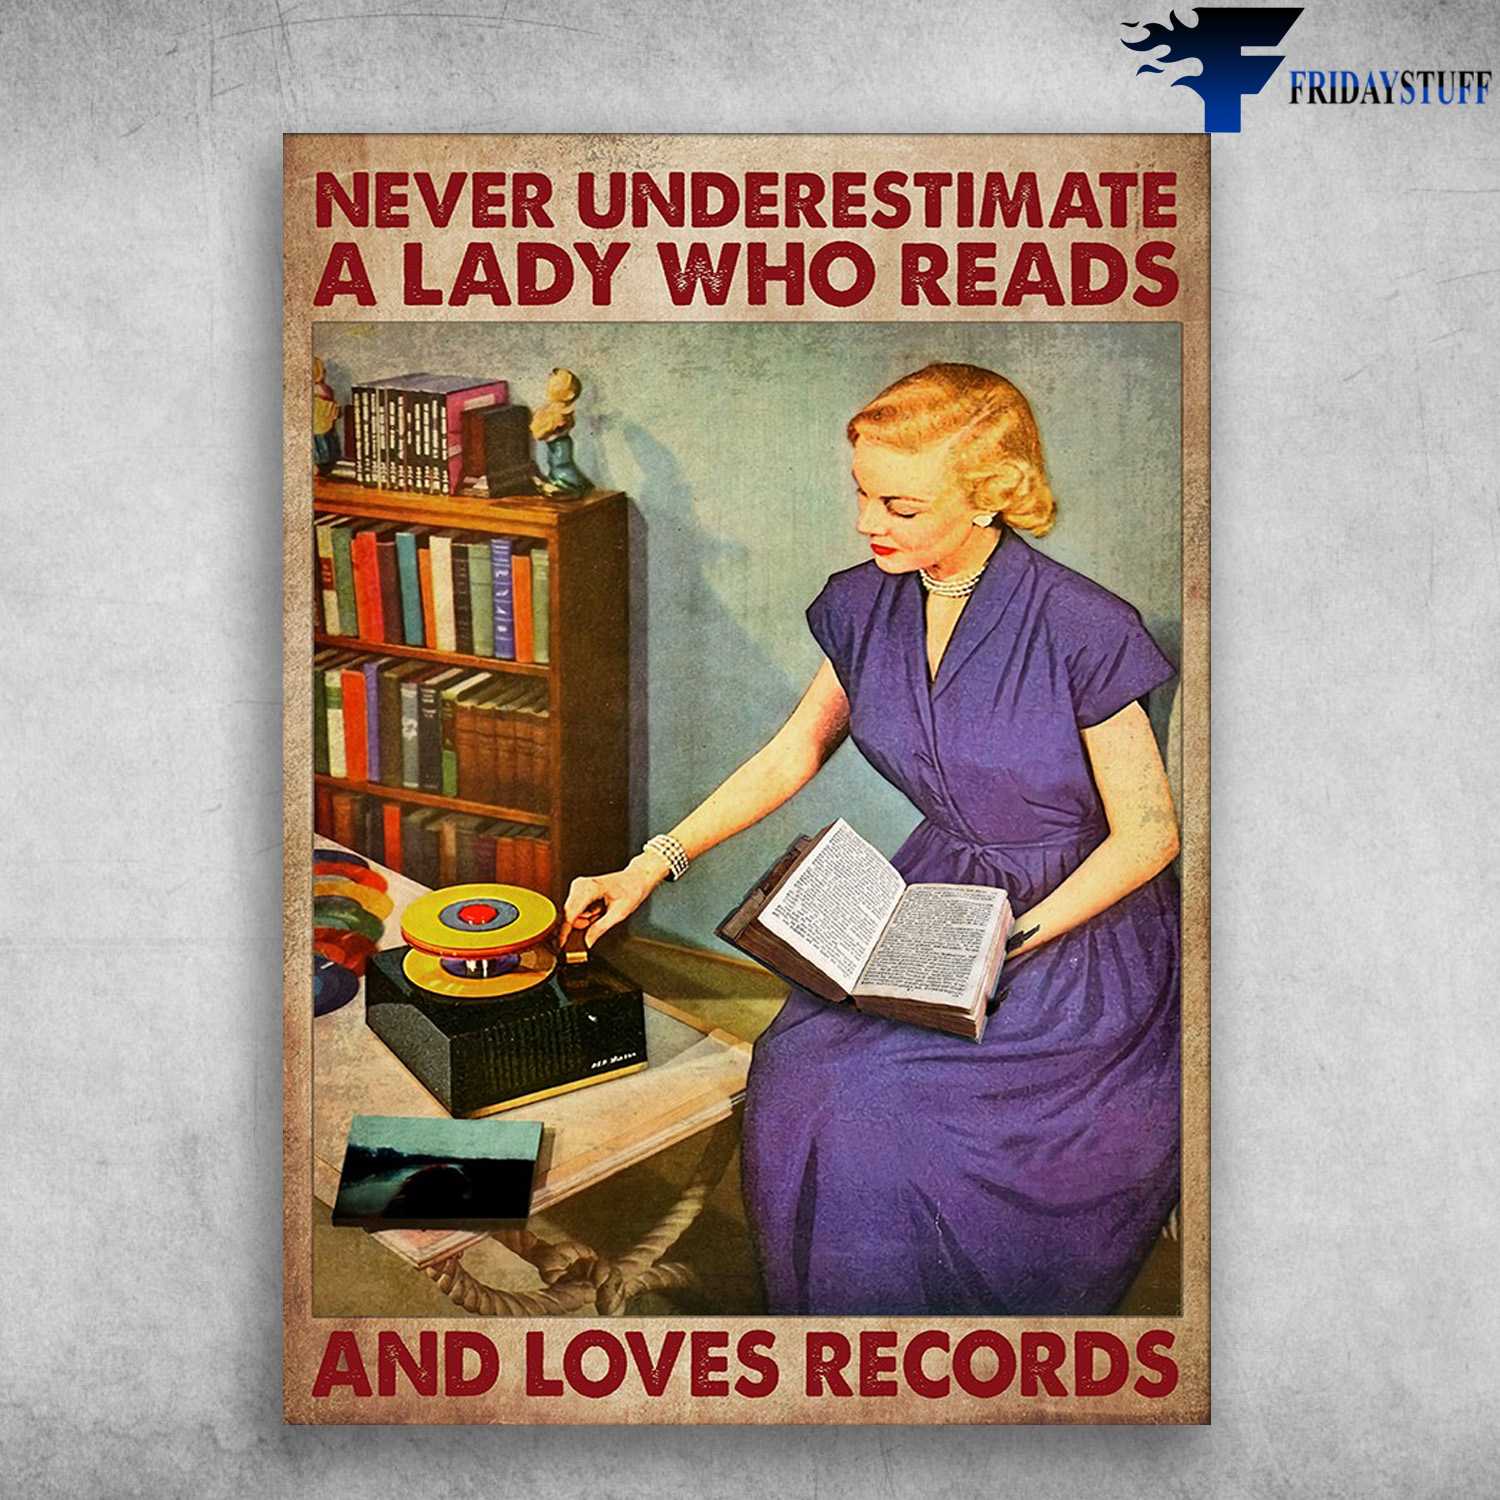 Book And Recoreds - Never Underestimate, A Lady Who Reads, And Loves Records, Vinyl Record, Book Reading